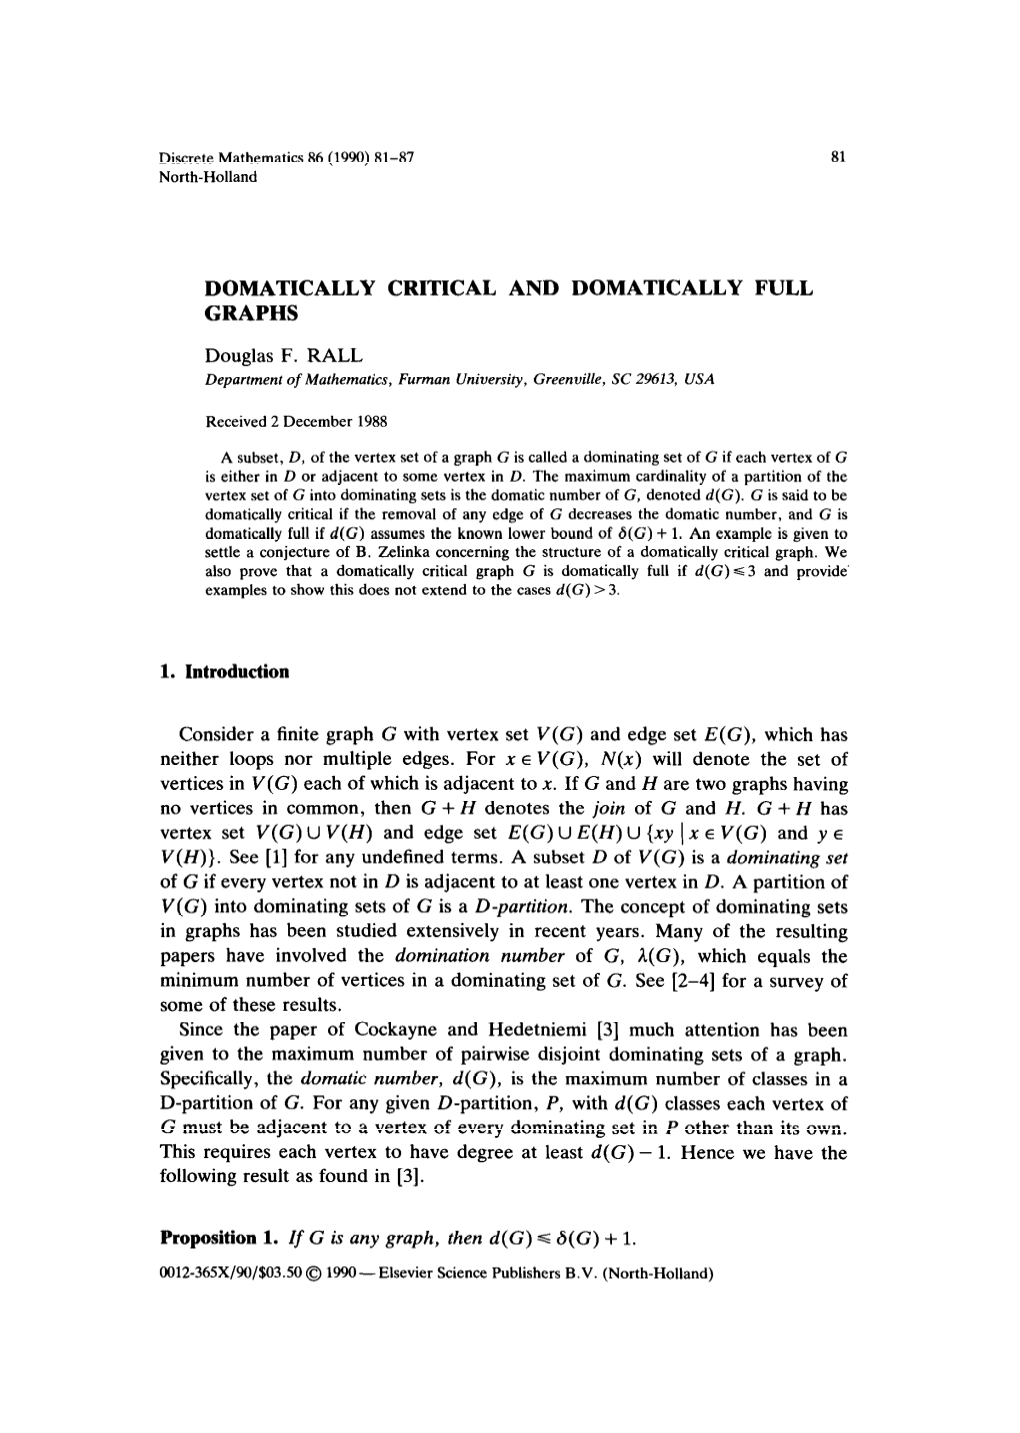 Domatically Critical and Domatically Full Graphs